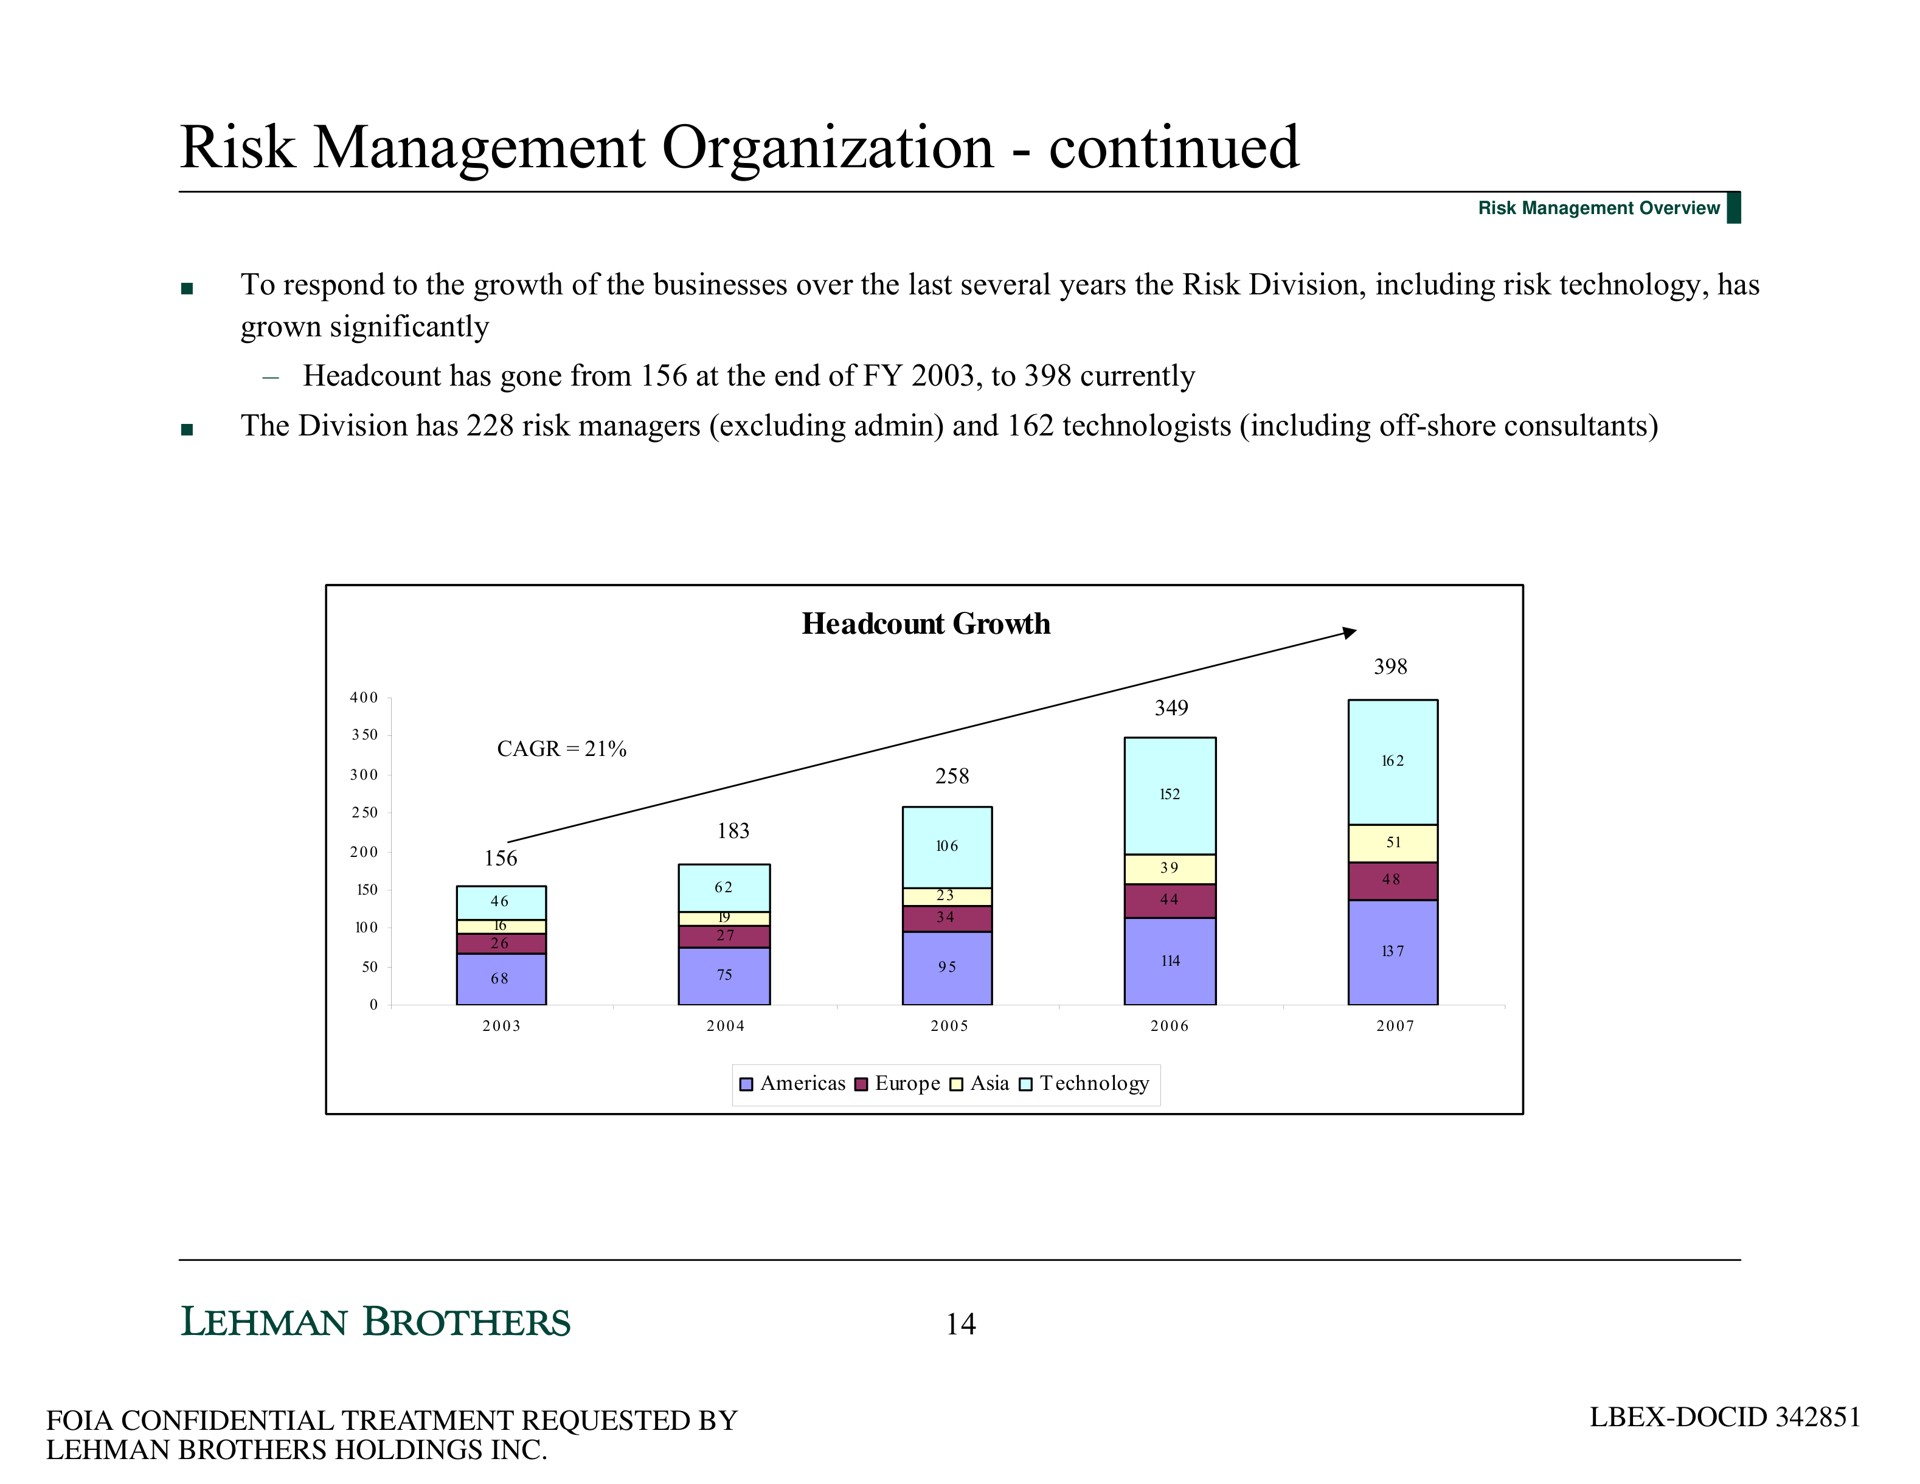 risk management organization continued | Lehman Brothers